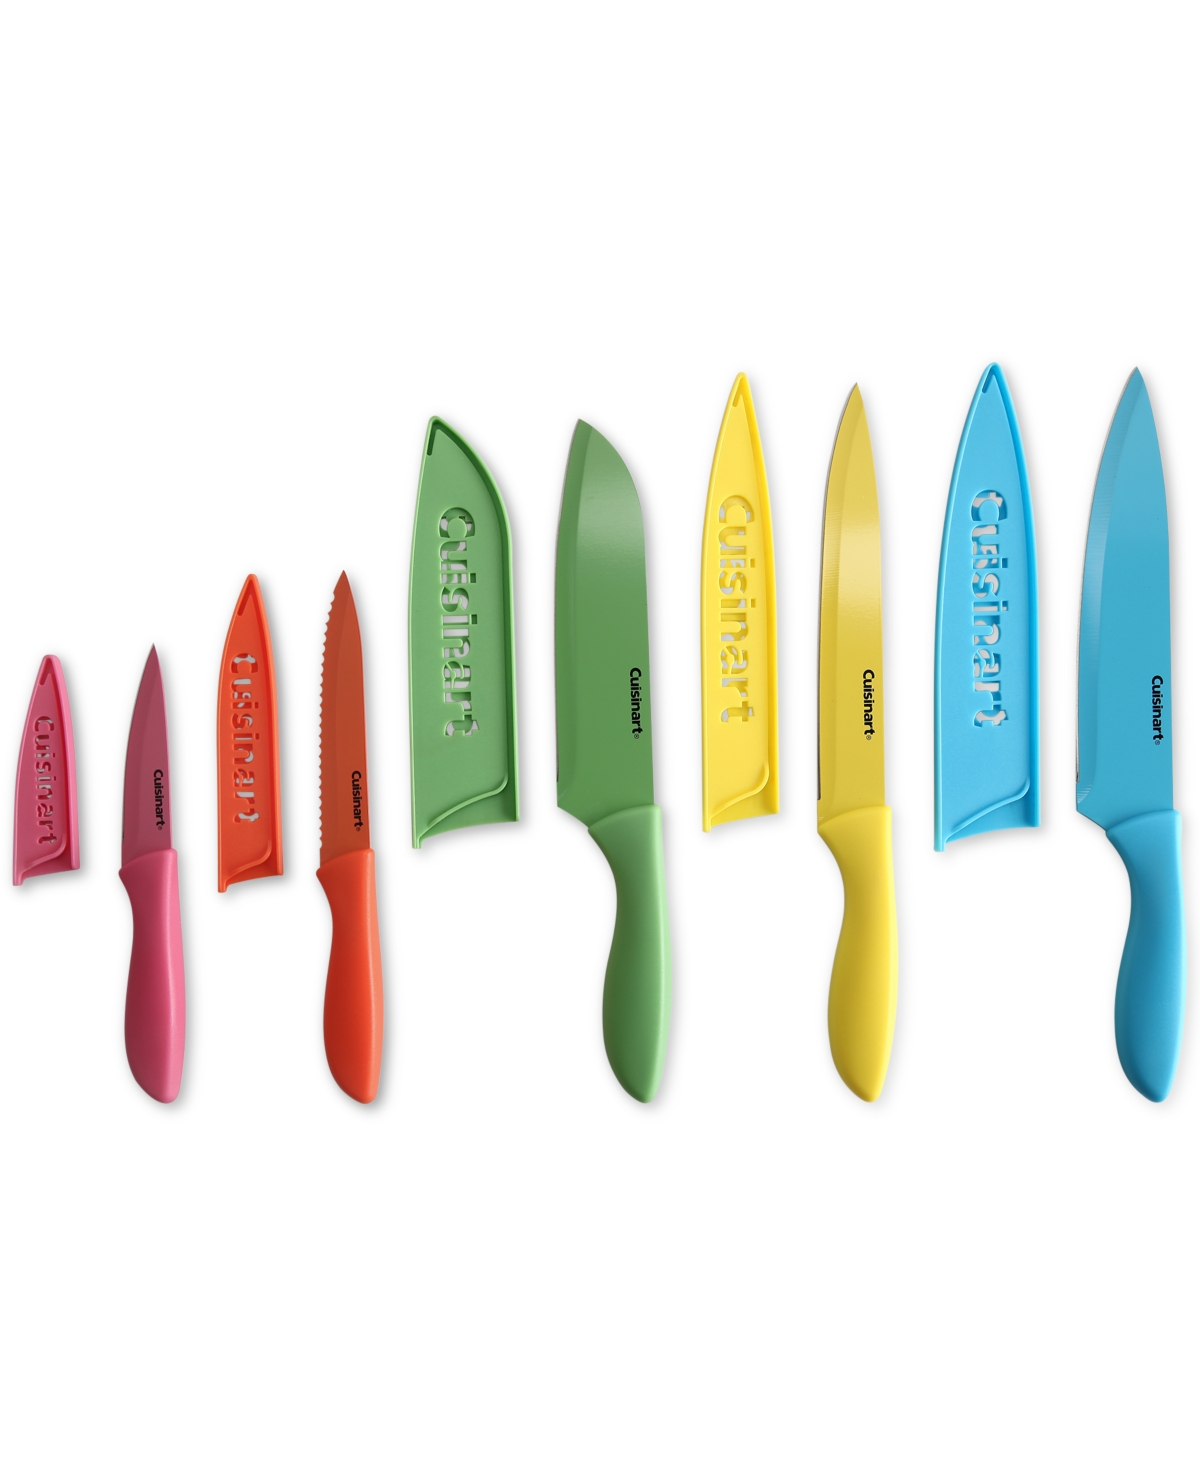 Cuisinart 10 Piece Ceramic-Coated Cutlery Set with Blade Guards